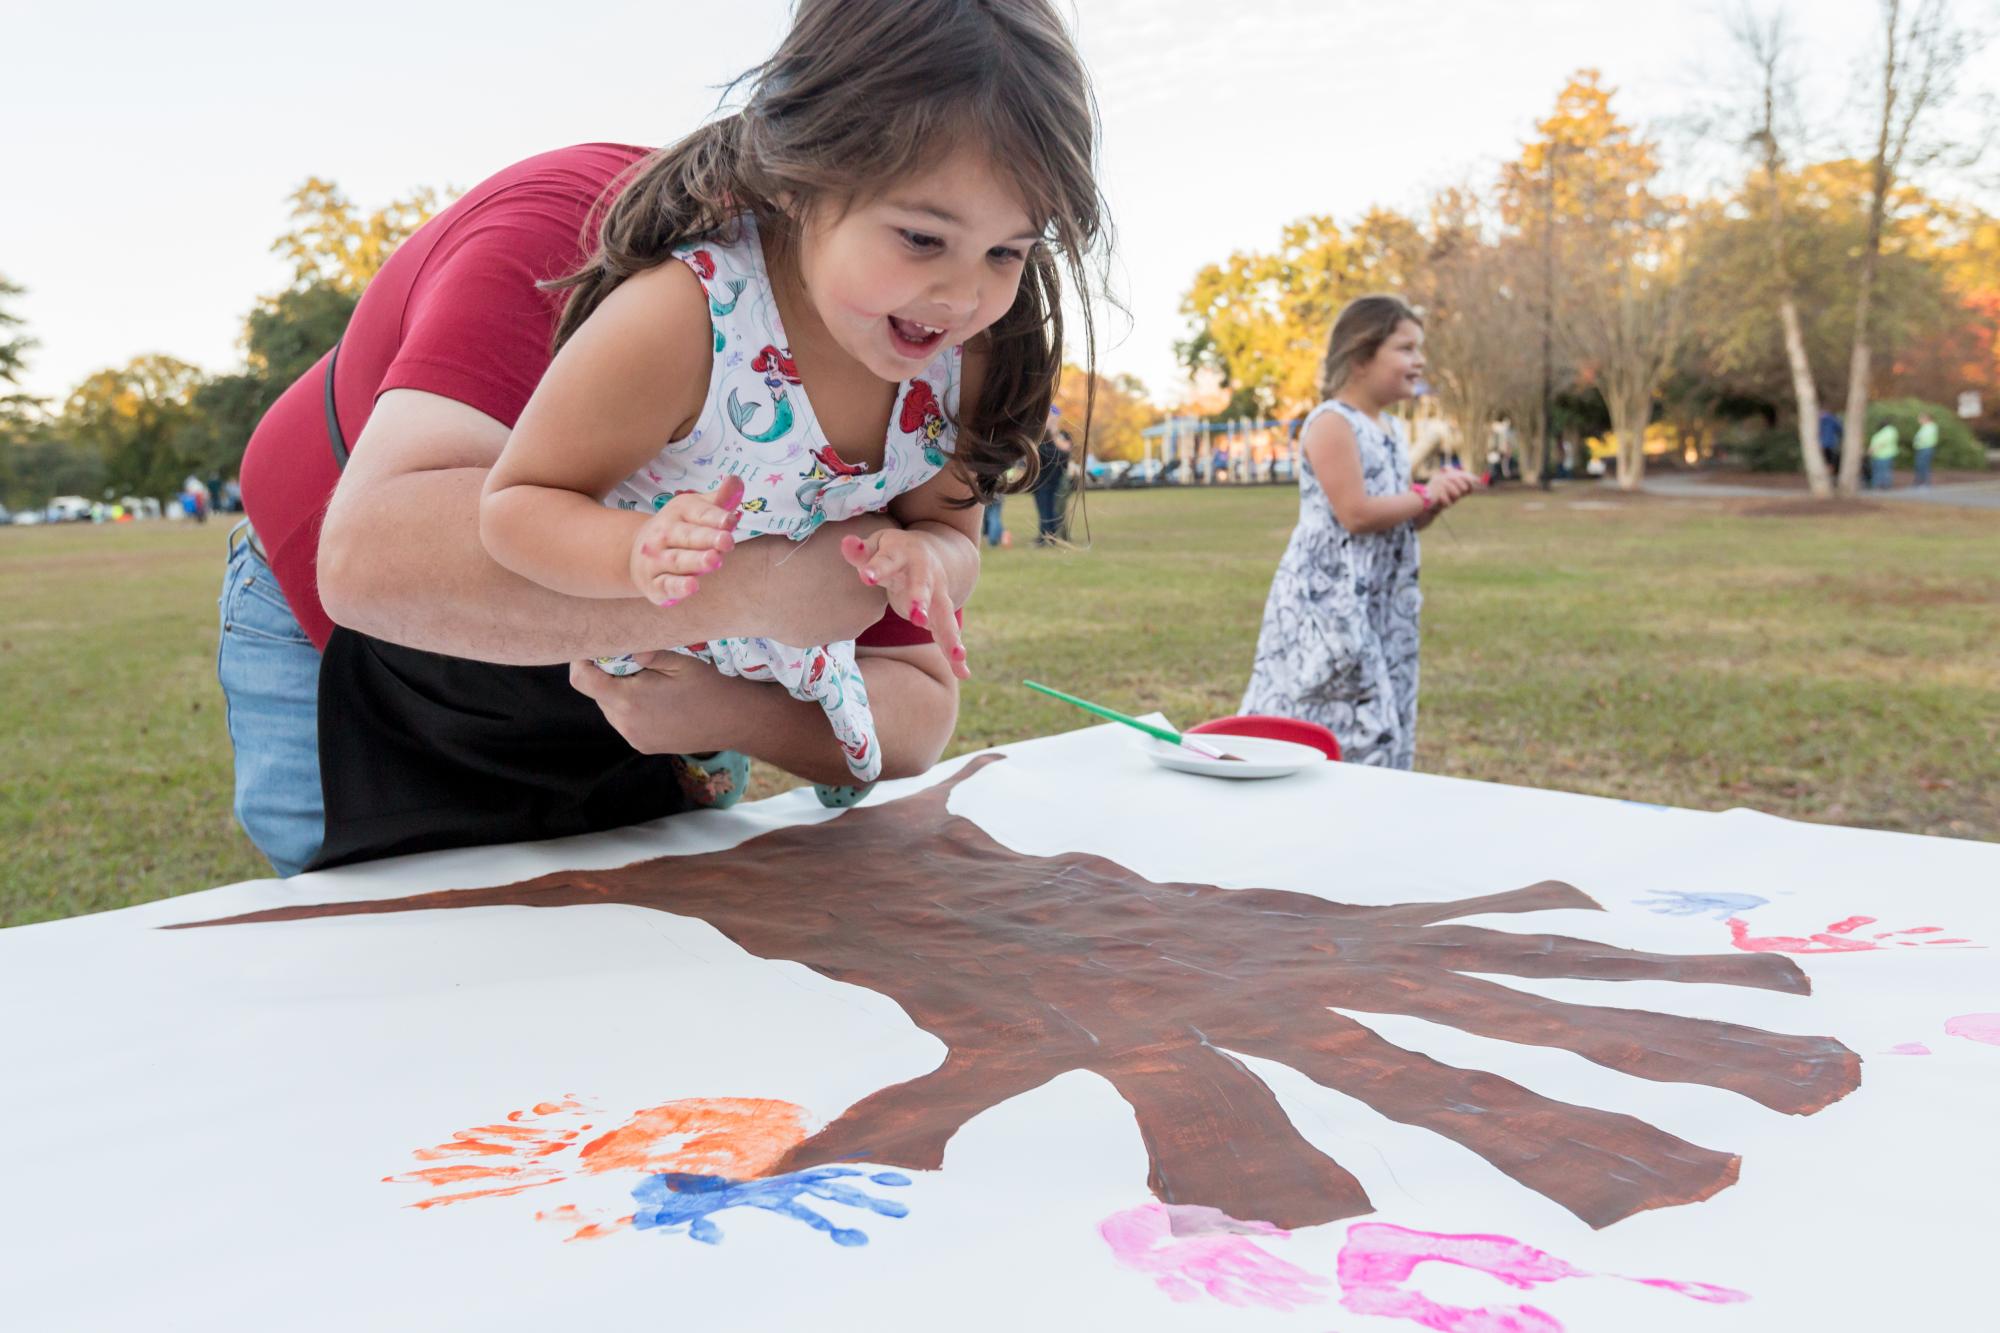 Child participating in a community art project